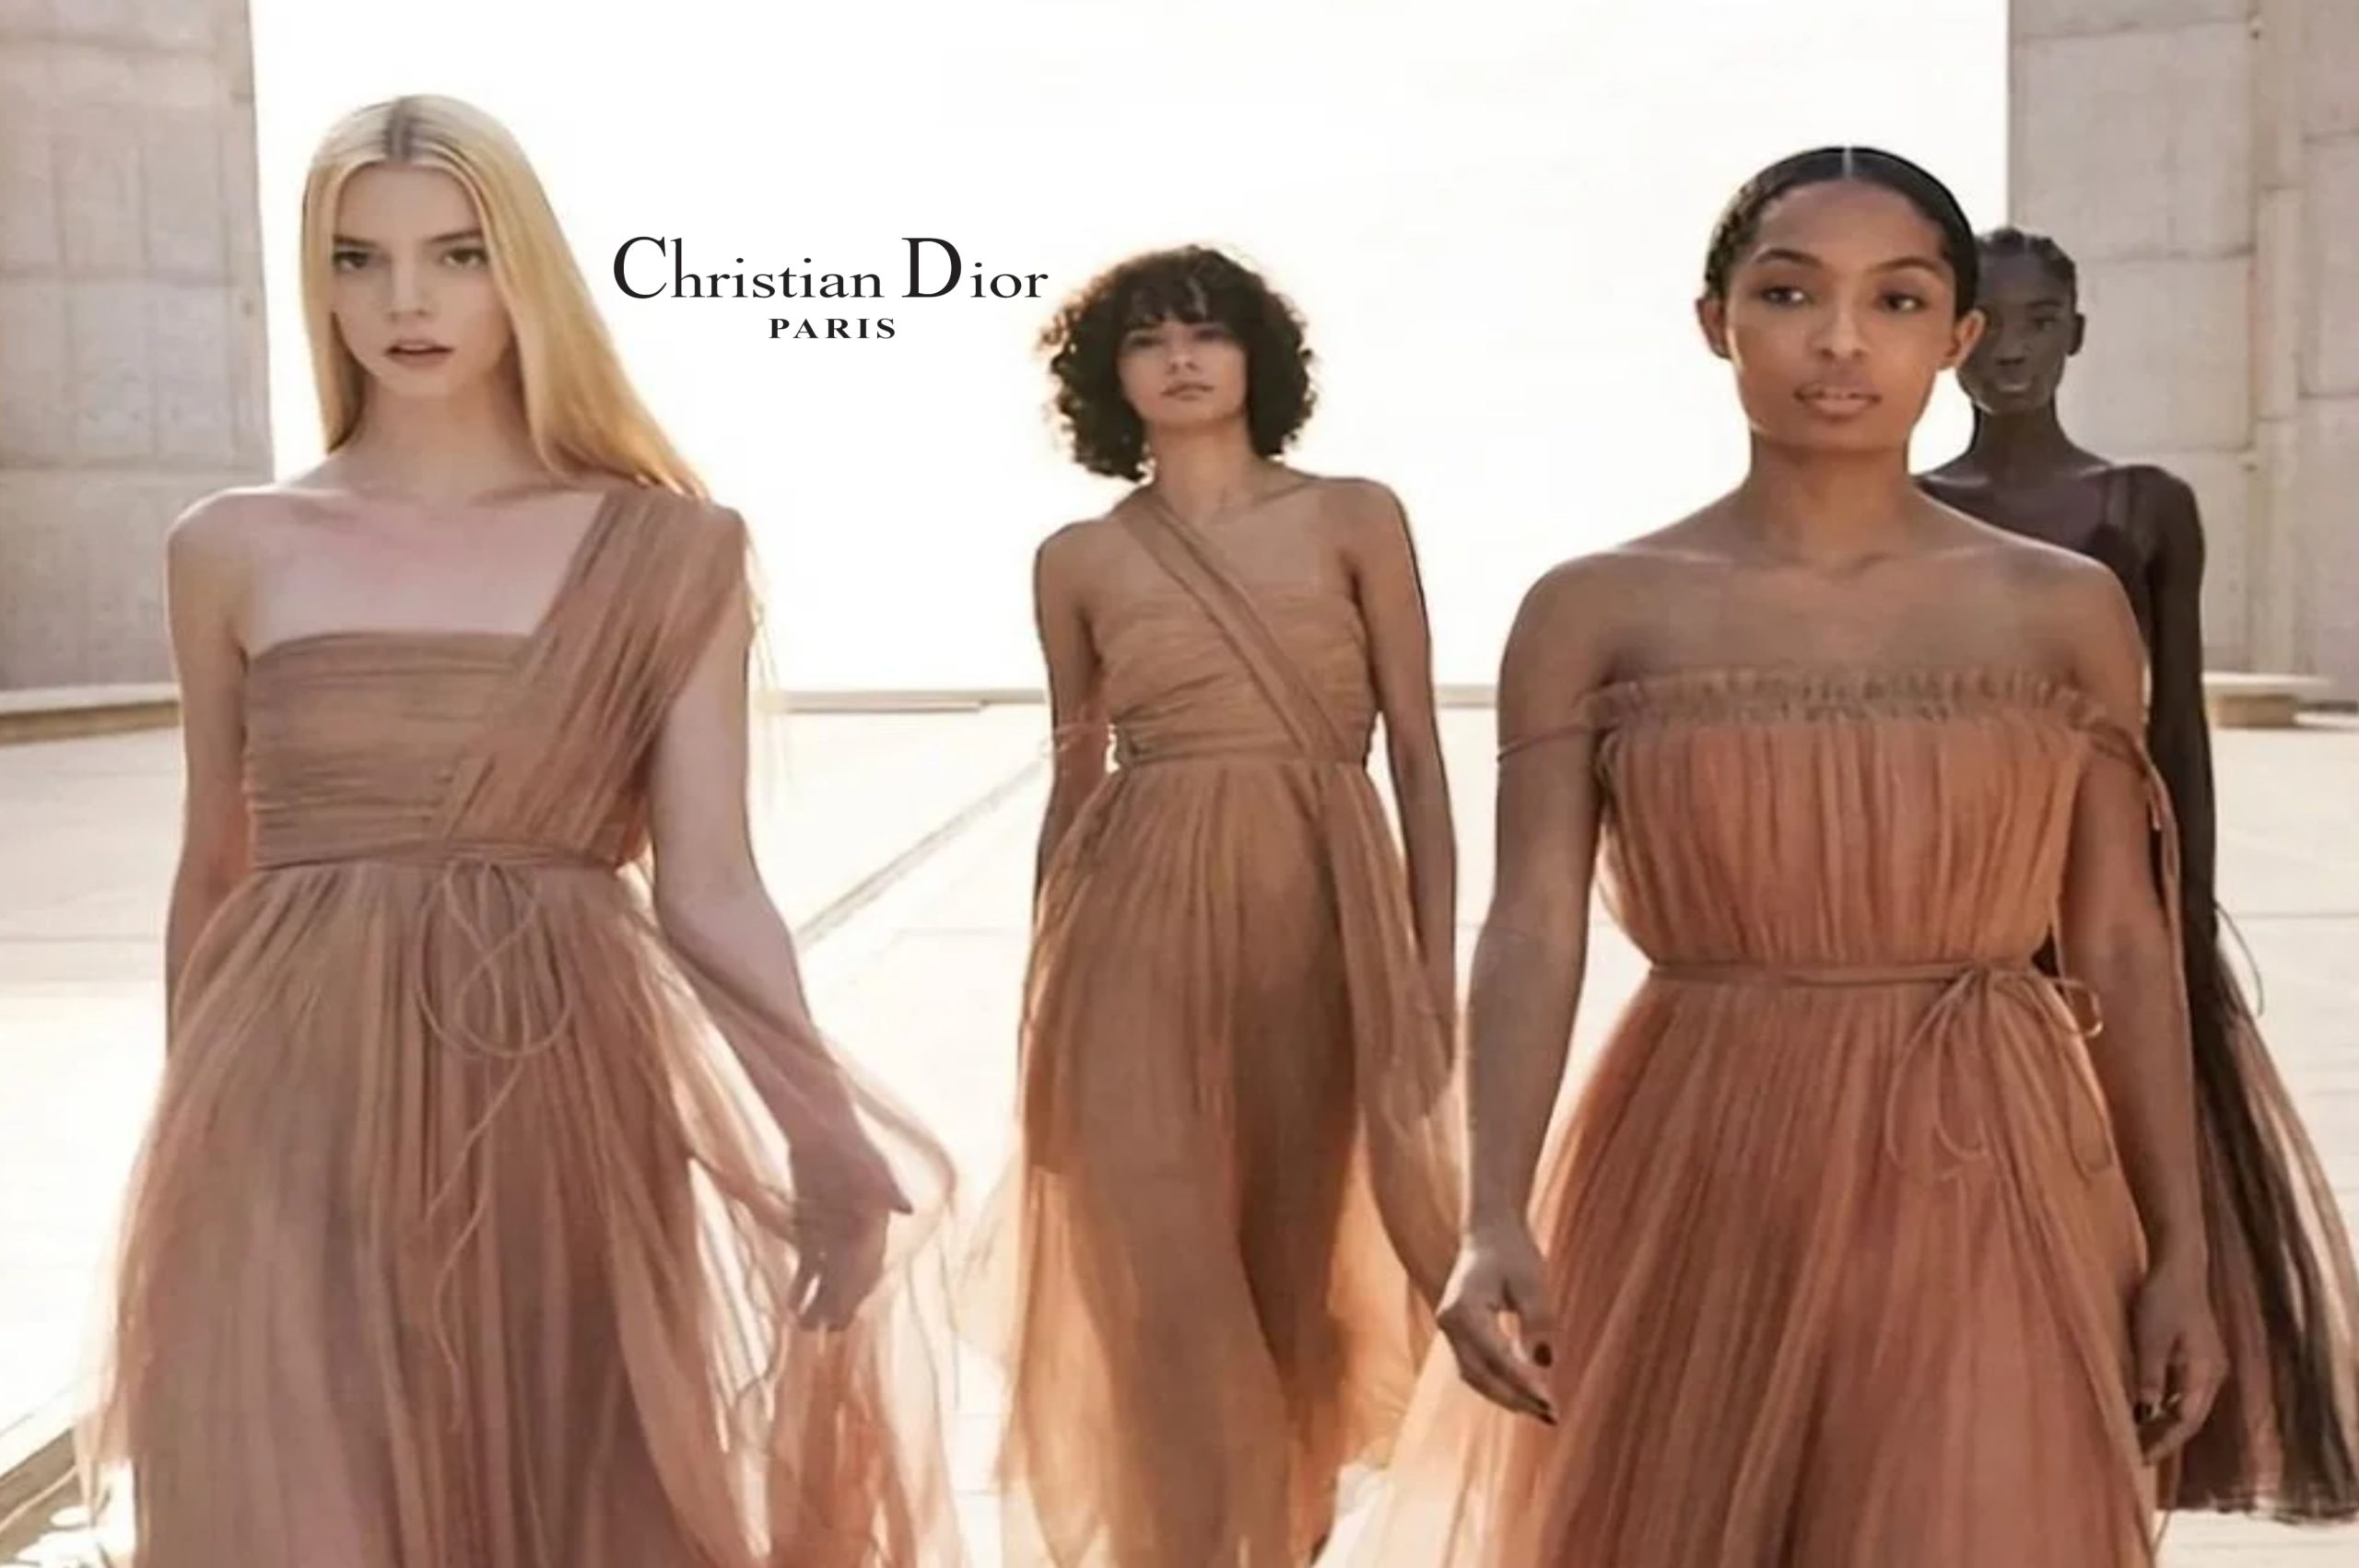 Watch: Celebrity stars Anya Taylor Joy and Yara Shahidi featured in Christian Dior Forever campaign